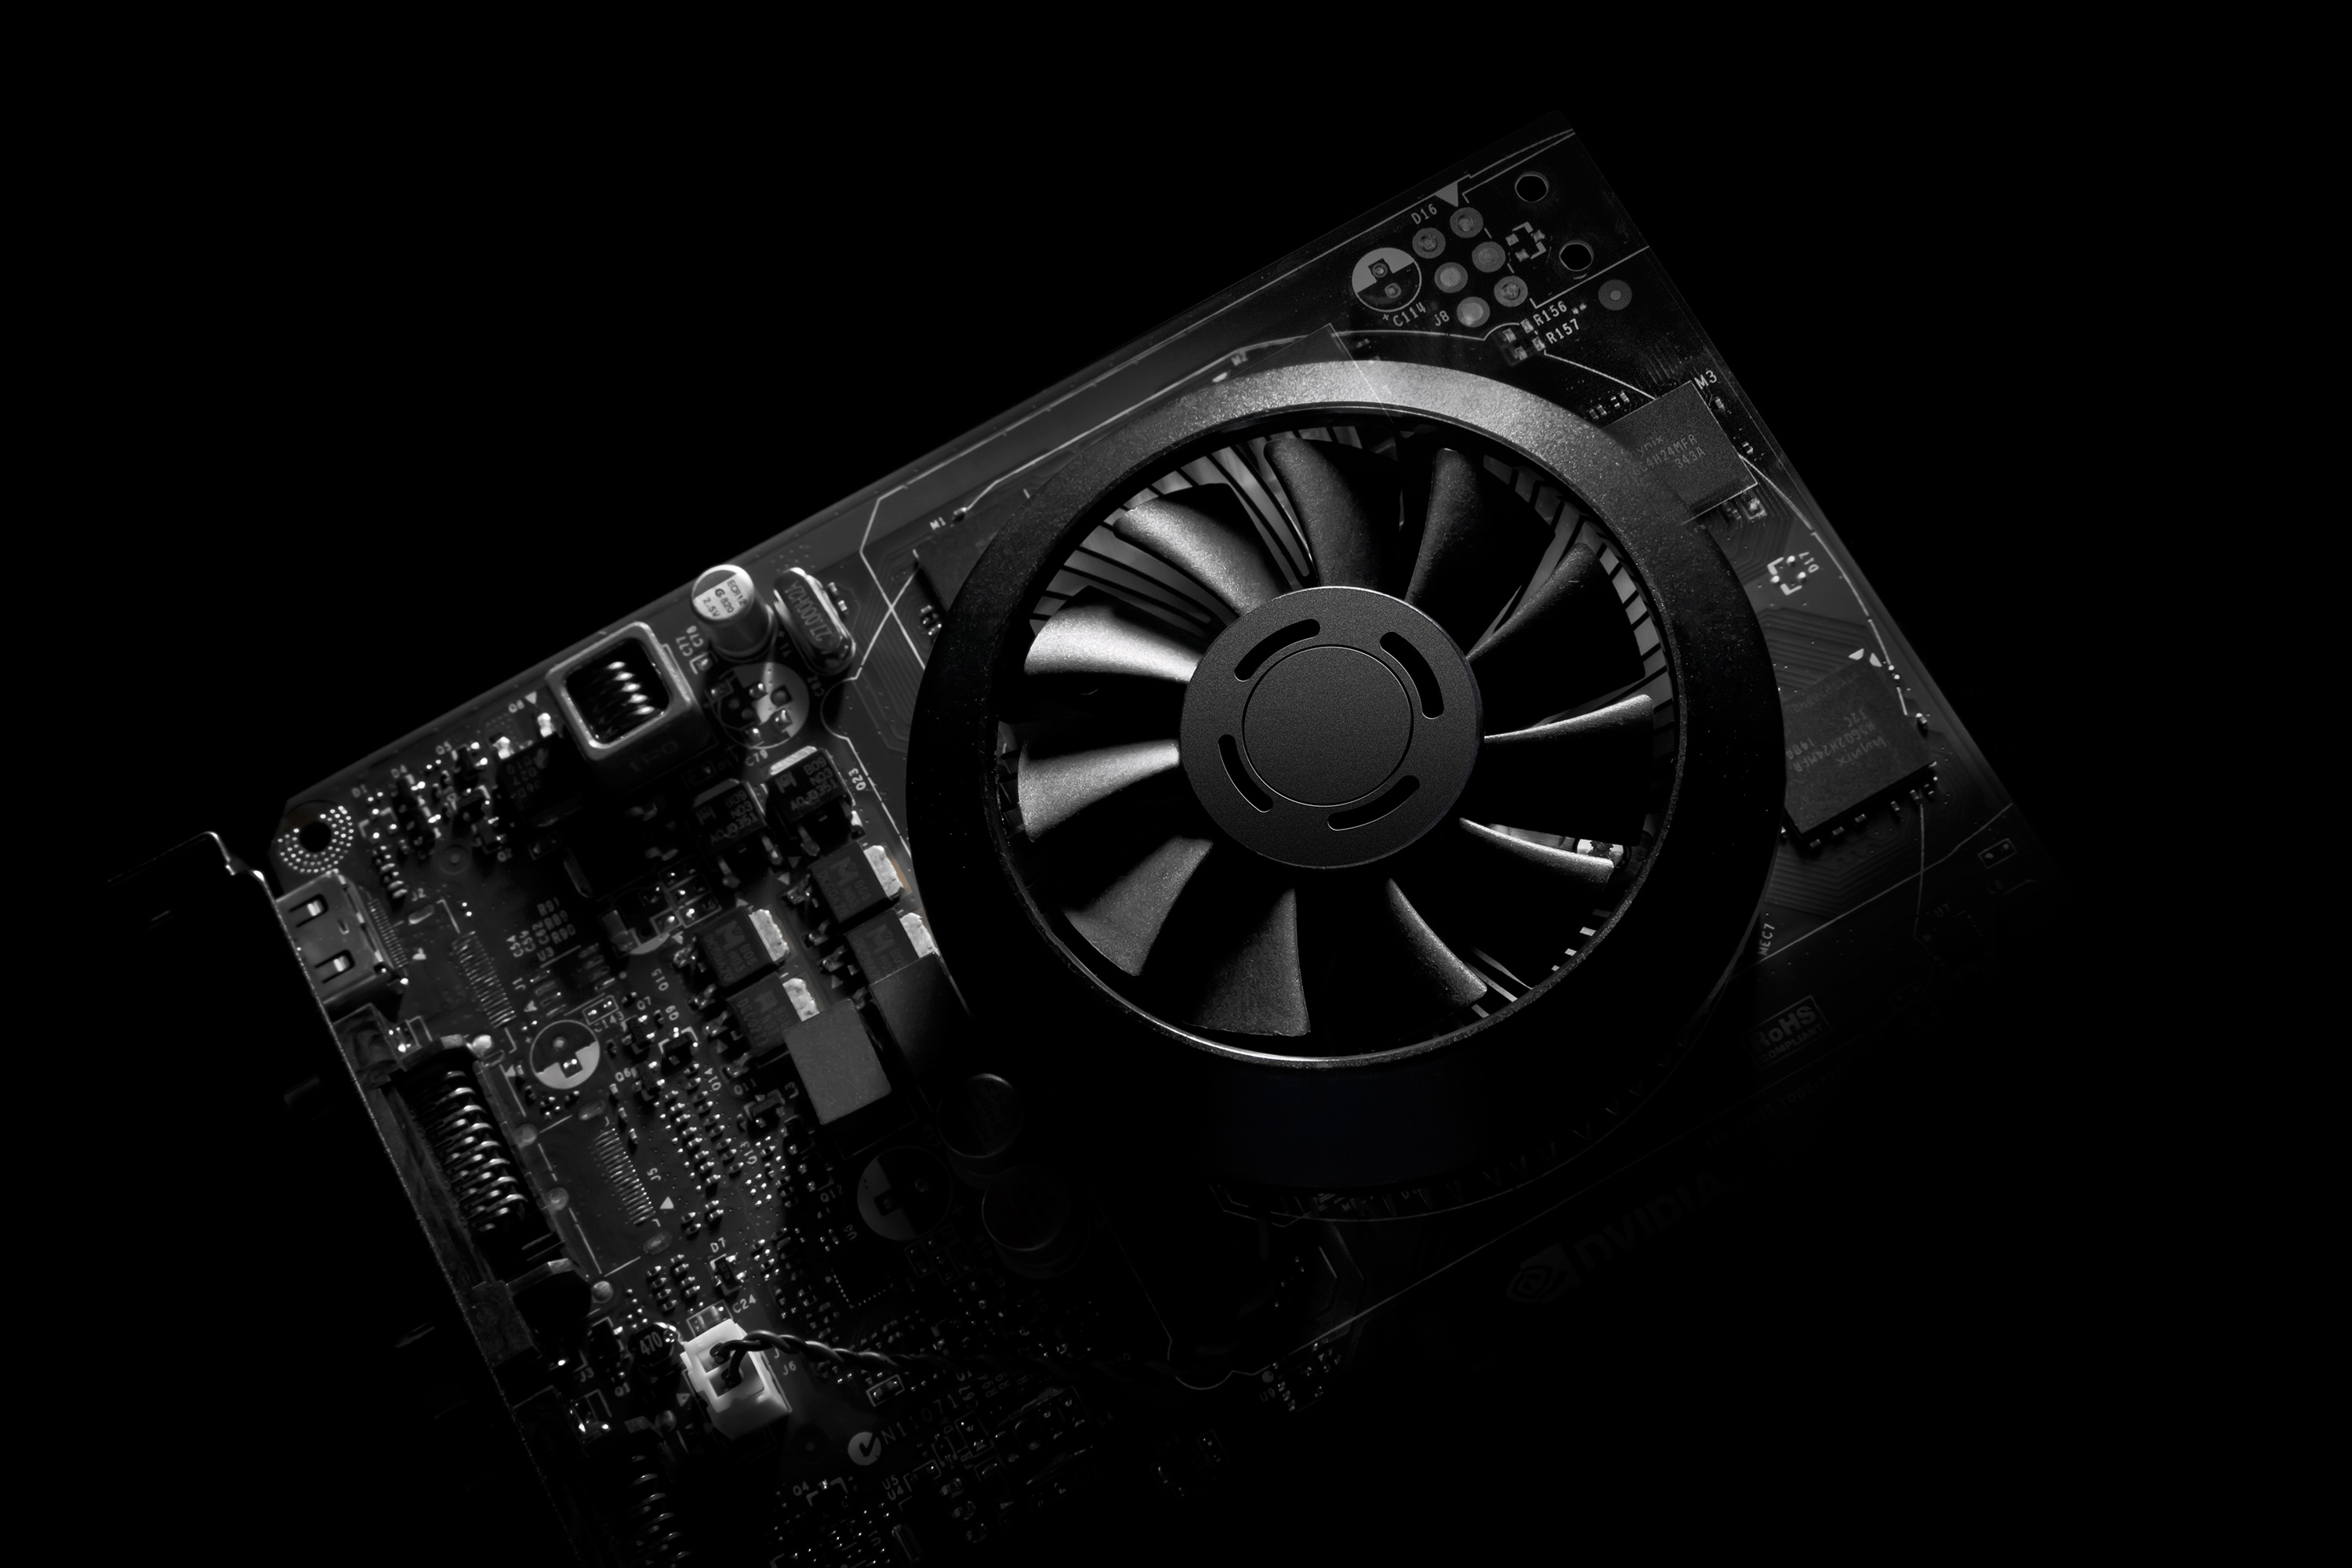 Meet The Reference Gtx 750 Ti Zotac Gtx 750 Series The Nvidia Geforce Gtx 750 Ti And Gtx 750 Review Maxwell Makes Its Move